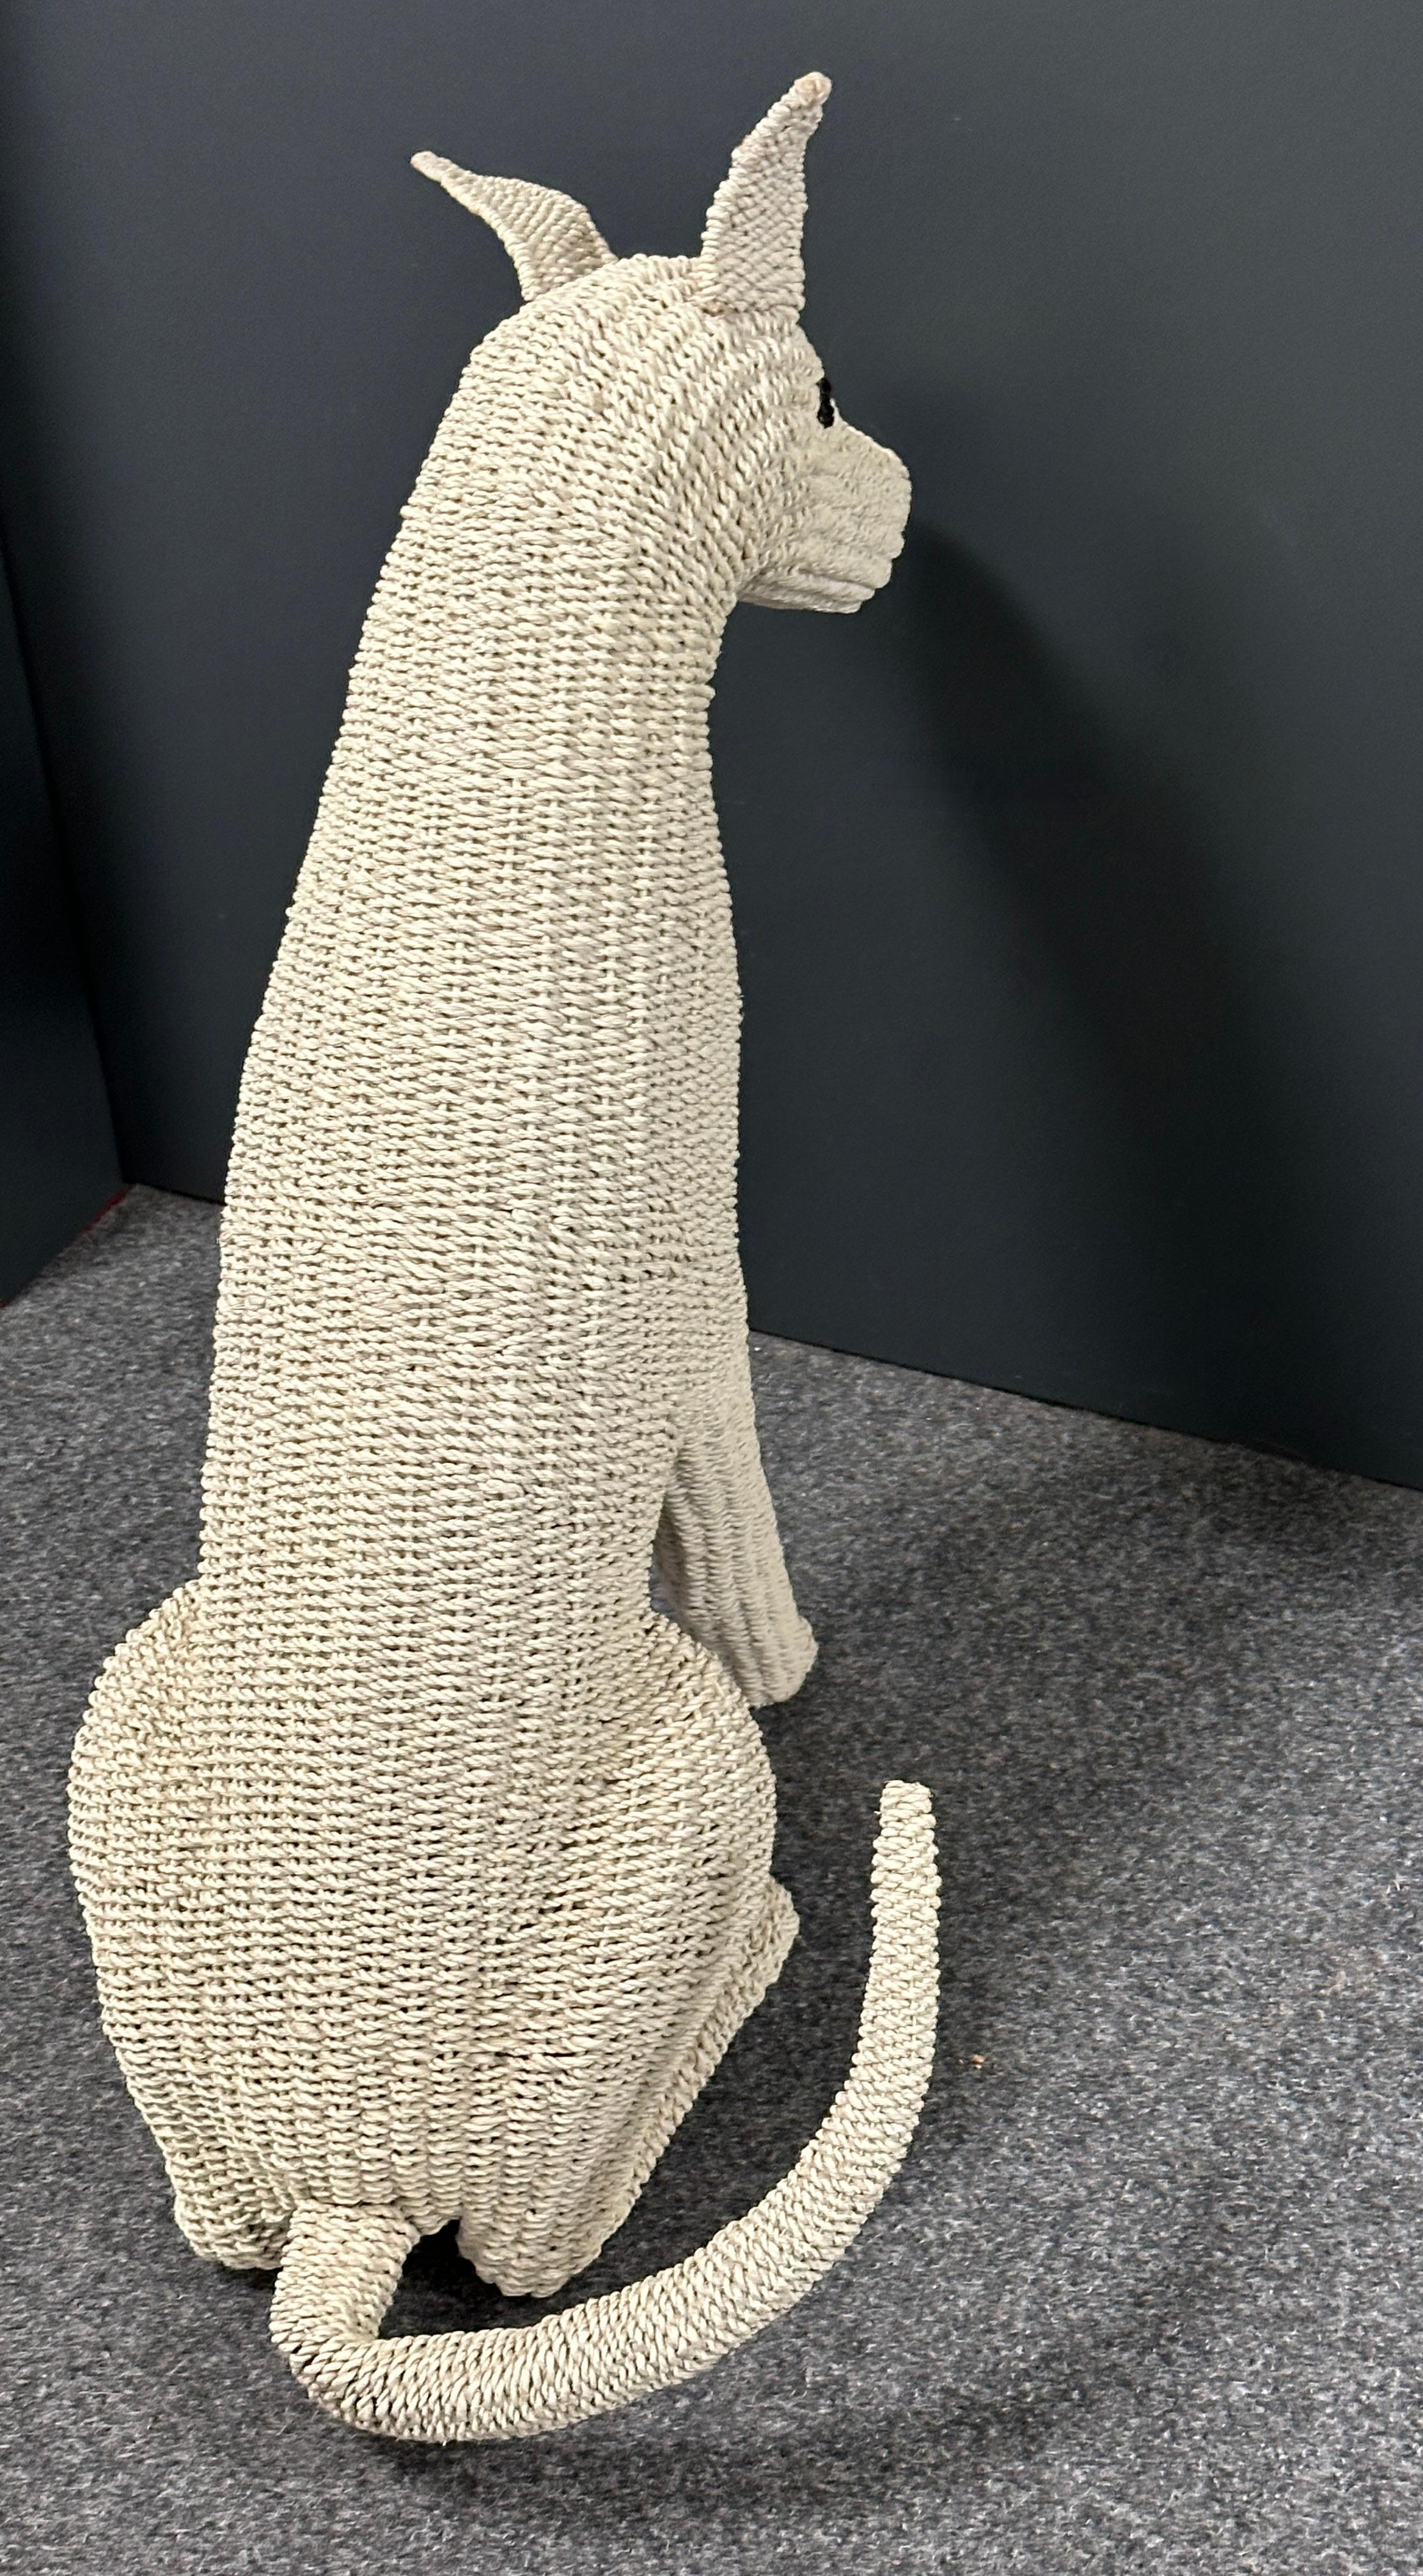 Stunning Life Size White Rattan Wicker Dog Statue Figure, Italy, 1960s For Sale 7